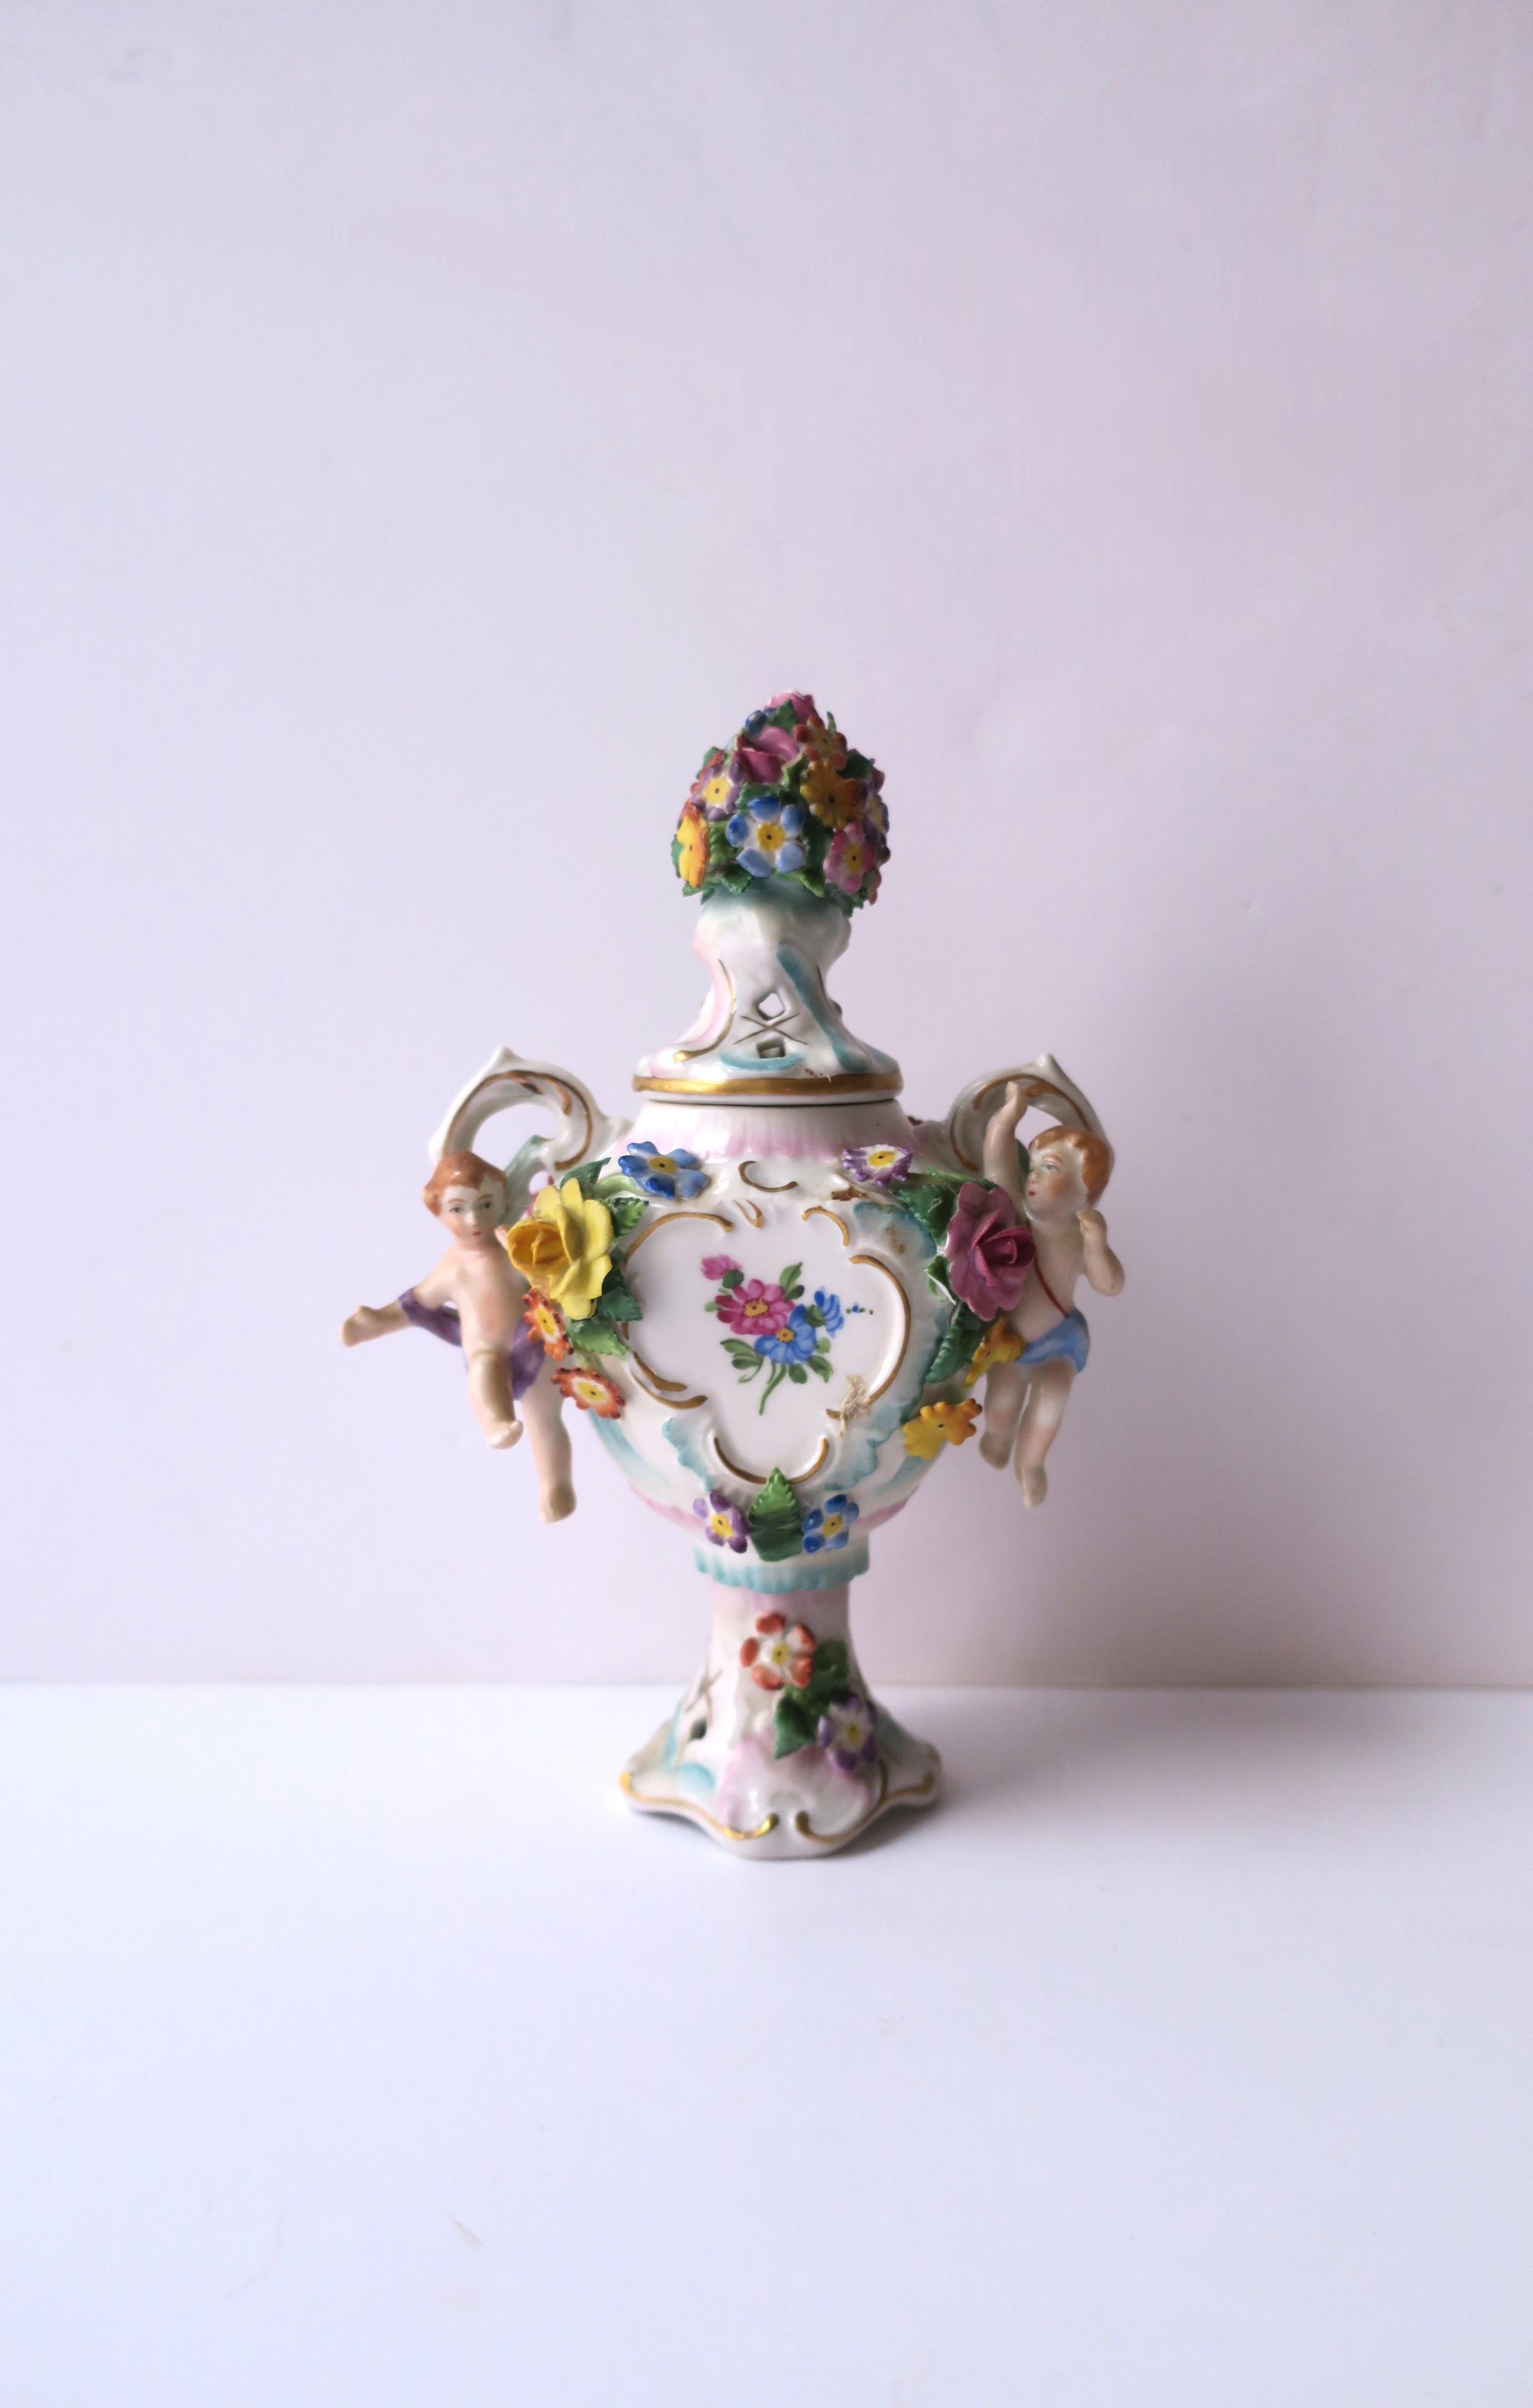 A beautiful German hand painted porcelain potpourri urn vase with flowers and putti, in the Rocco style, by Sitzendorf, circa 19th century or earlier, Germany. Piece has details floral lid, putti and flowers on front left and right sides, flowers on